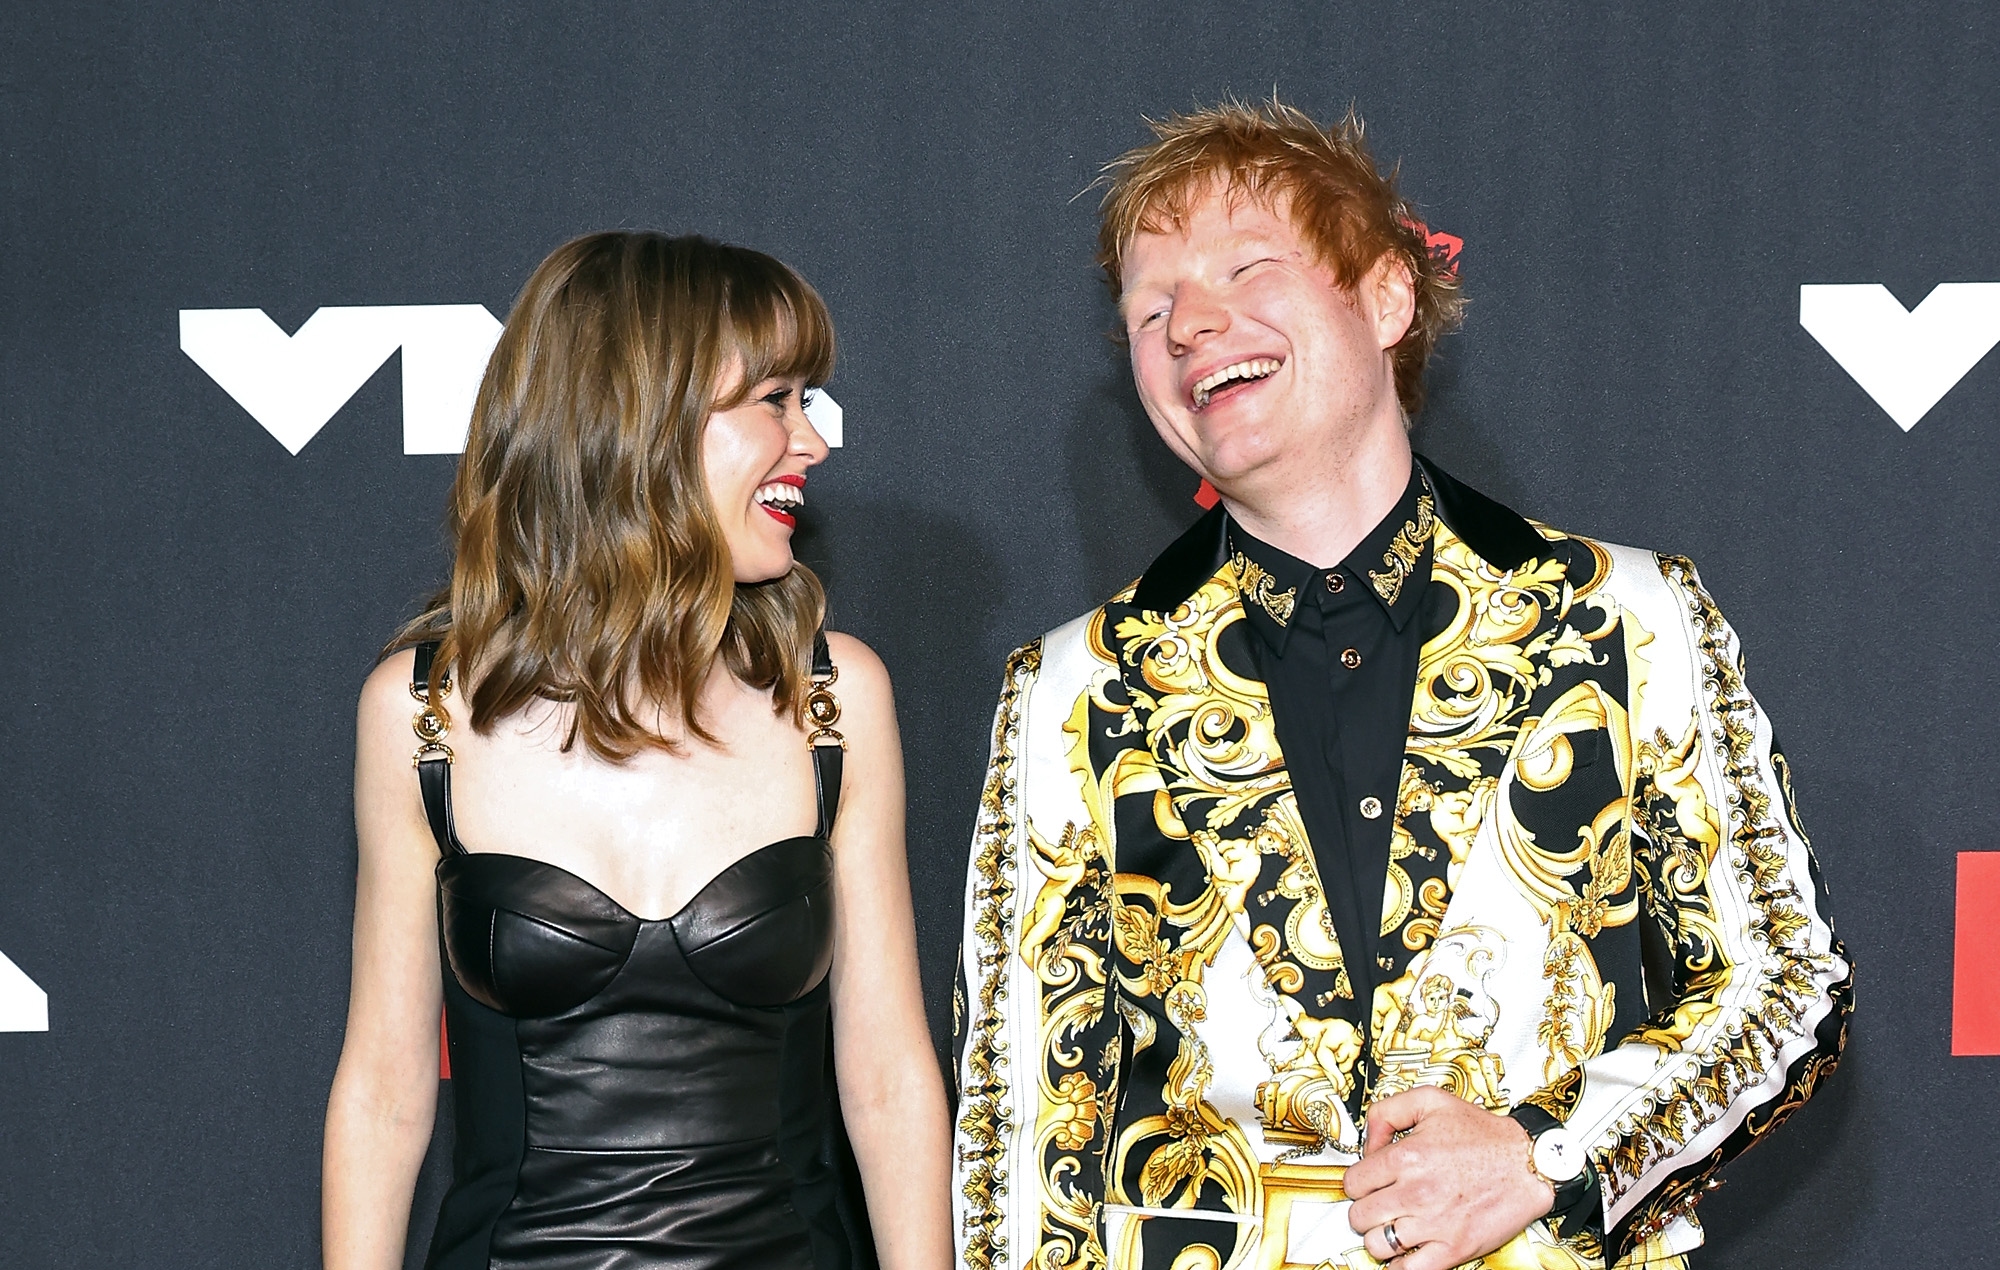 Watch Maisie Peters bring out Ed Sheeran to perform ‘Lego House’ at Wembley